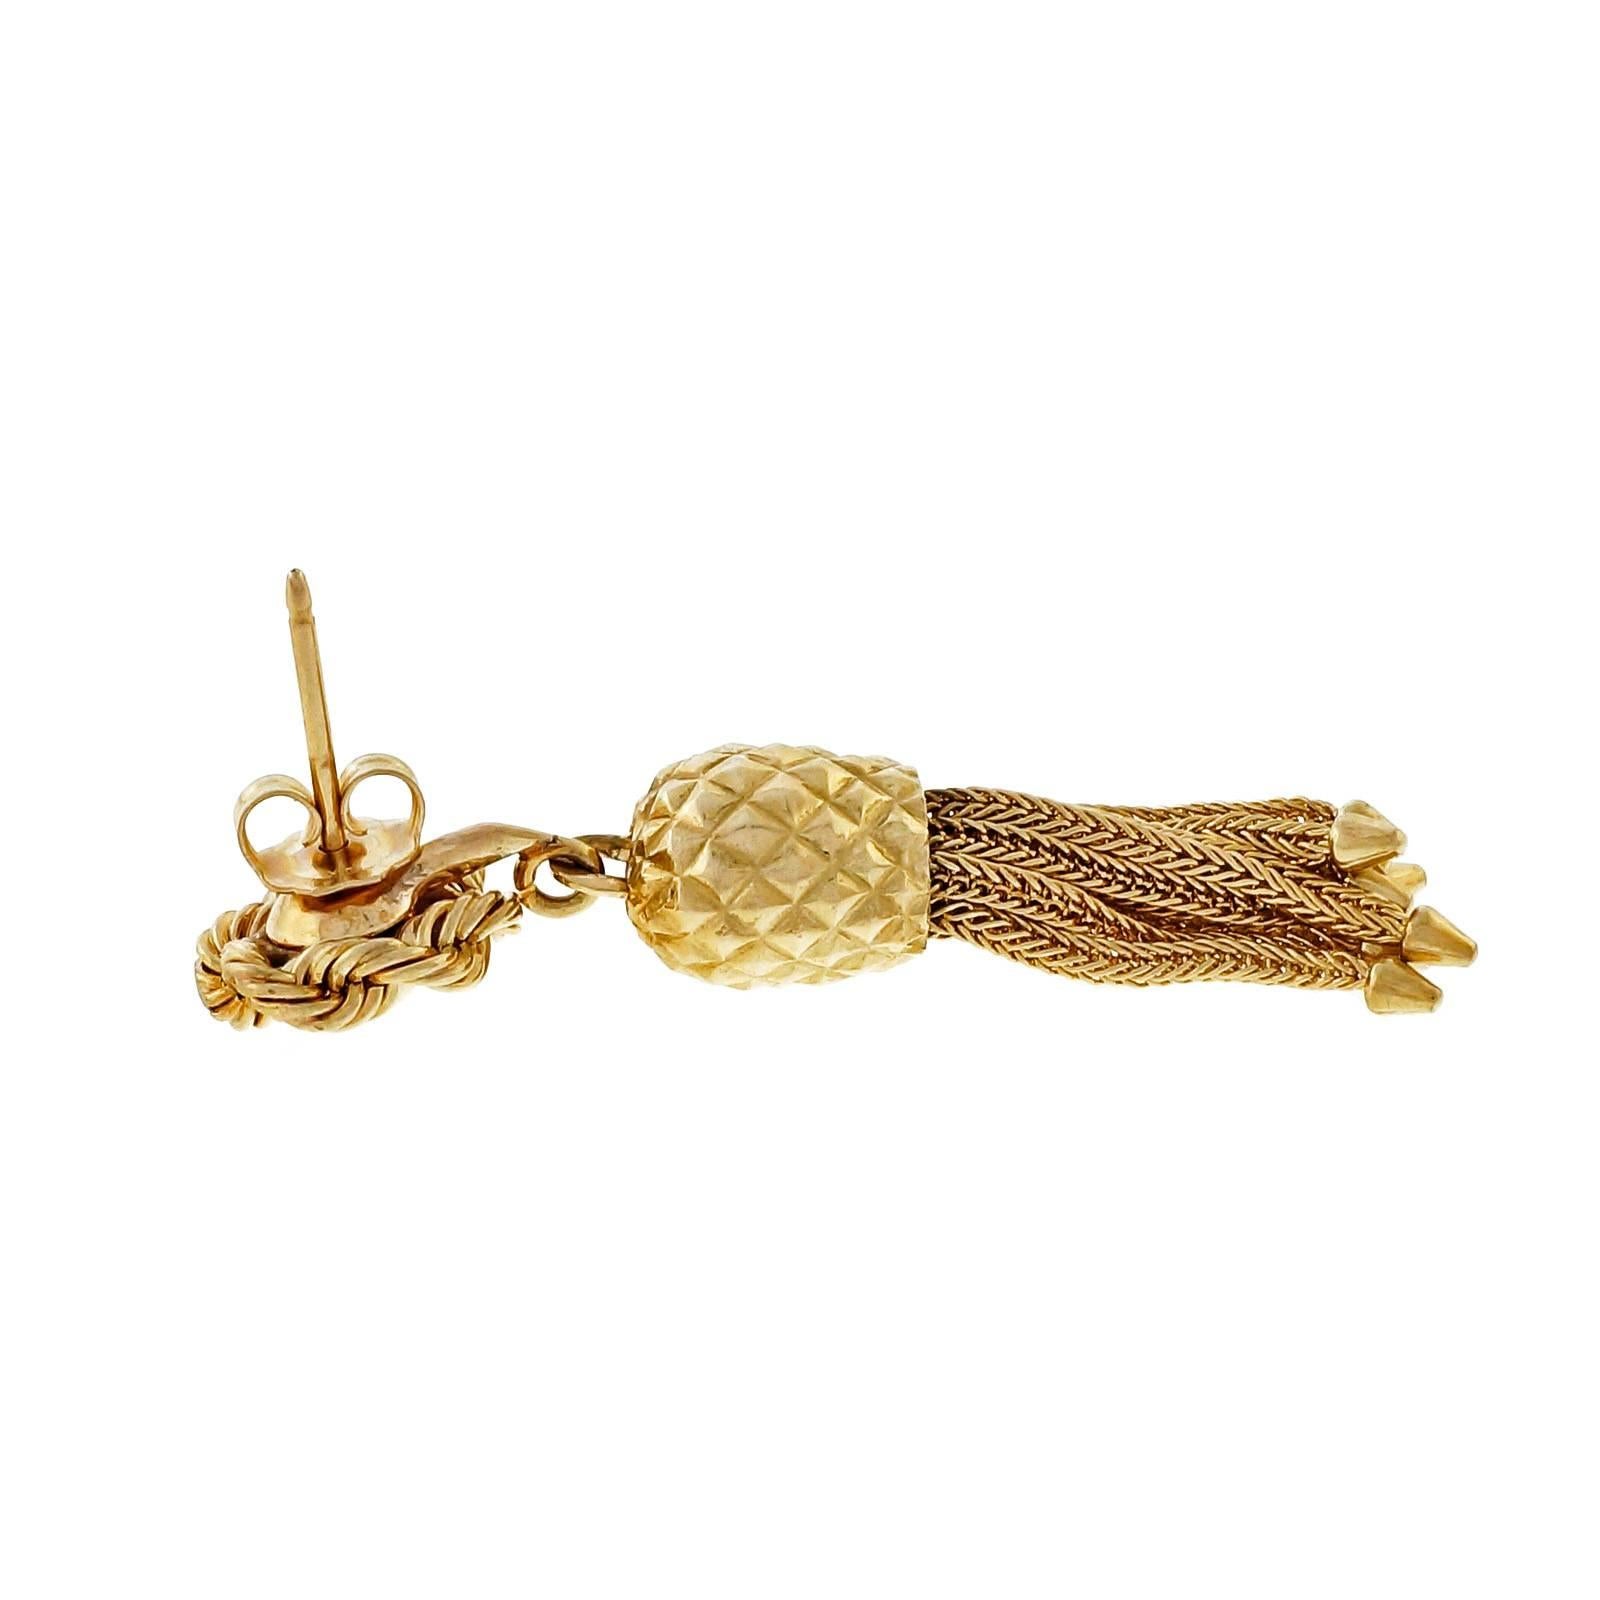 Solid 14k yellow gold 1950 dangle 3-D Tassel earrings. Rope chain top. Fox tail Tassel bottoms.

14k yellow gold
Tested: 14k
Stamped: 585
15.8 grams
Top to bottom: 47.10mm or 1.85 inches
Width: 11.14mm or .44 inch
Depth: 8.64mm
